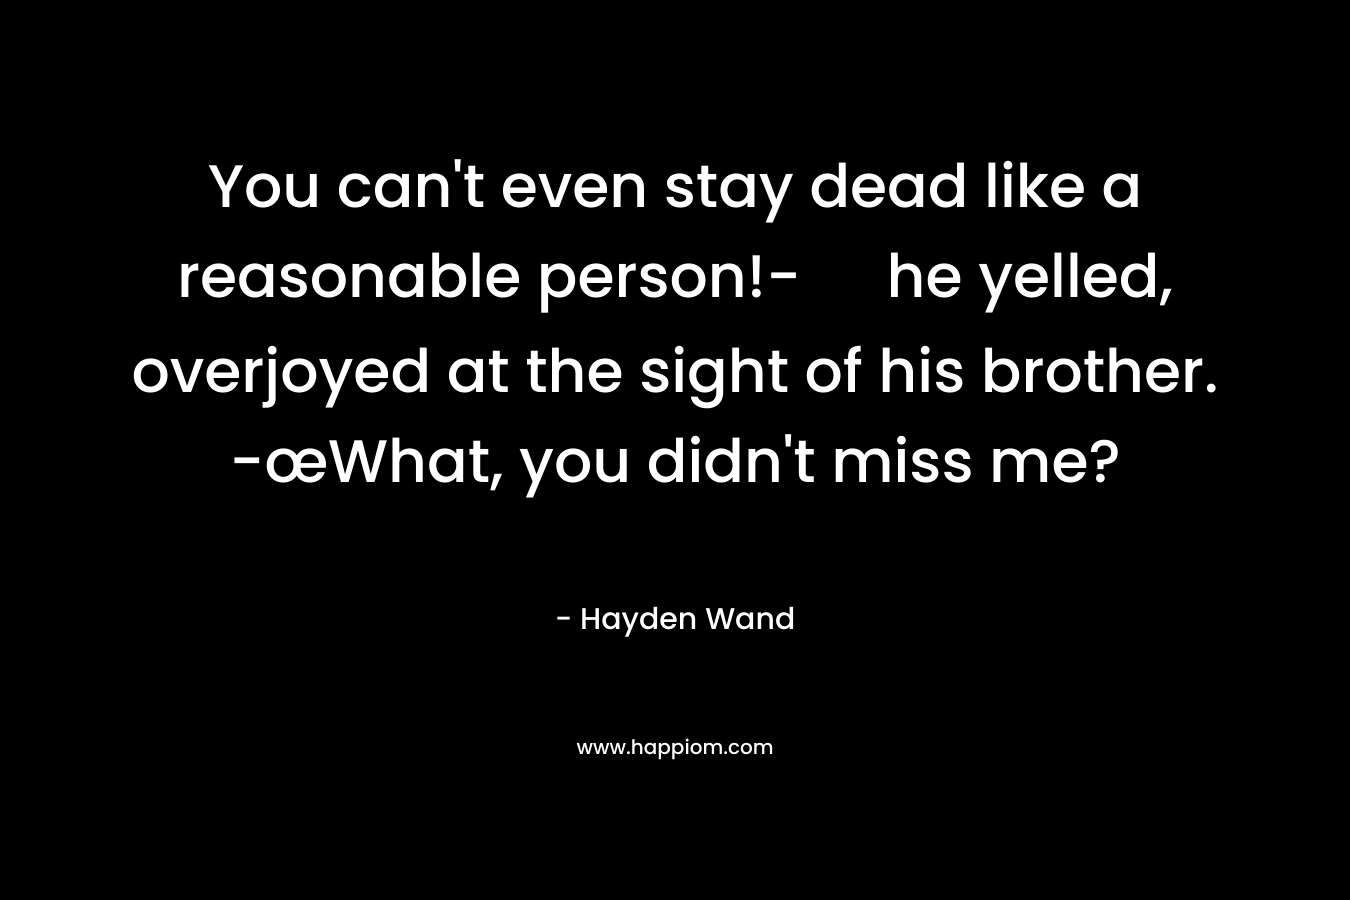 You can’t even stay dead like a reasonable person!- he yelled, overjoyed at the sight of his brother. -œWhat, you didn’t miss me? – Hayden Wand